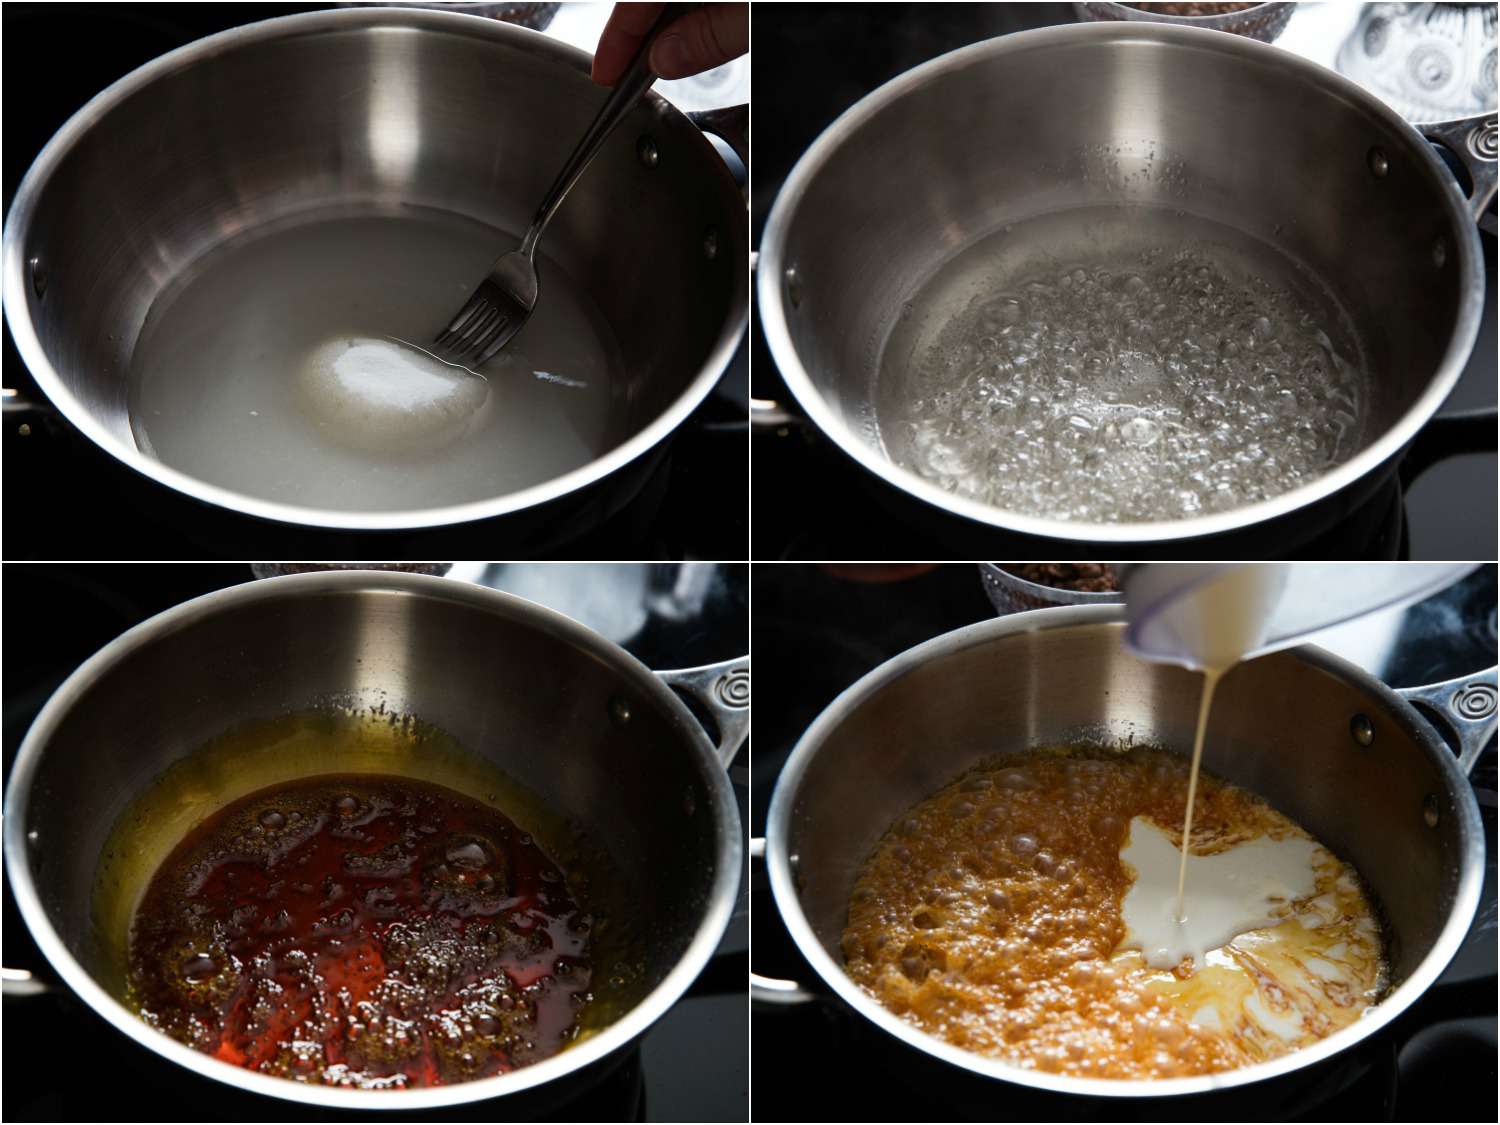 Collage depicting stages of making caramel: mixing sugar in water with a fork, letting the mixture boil until it reaches the color of clover honey and adding cream.